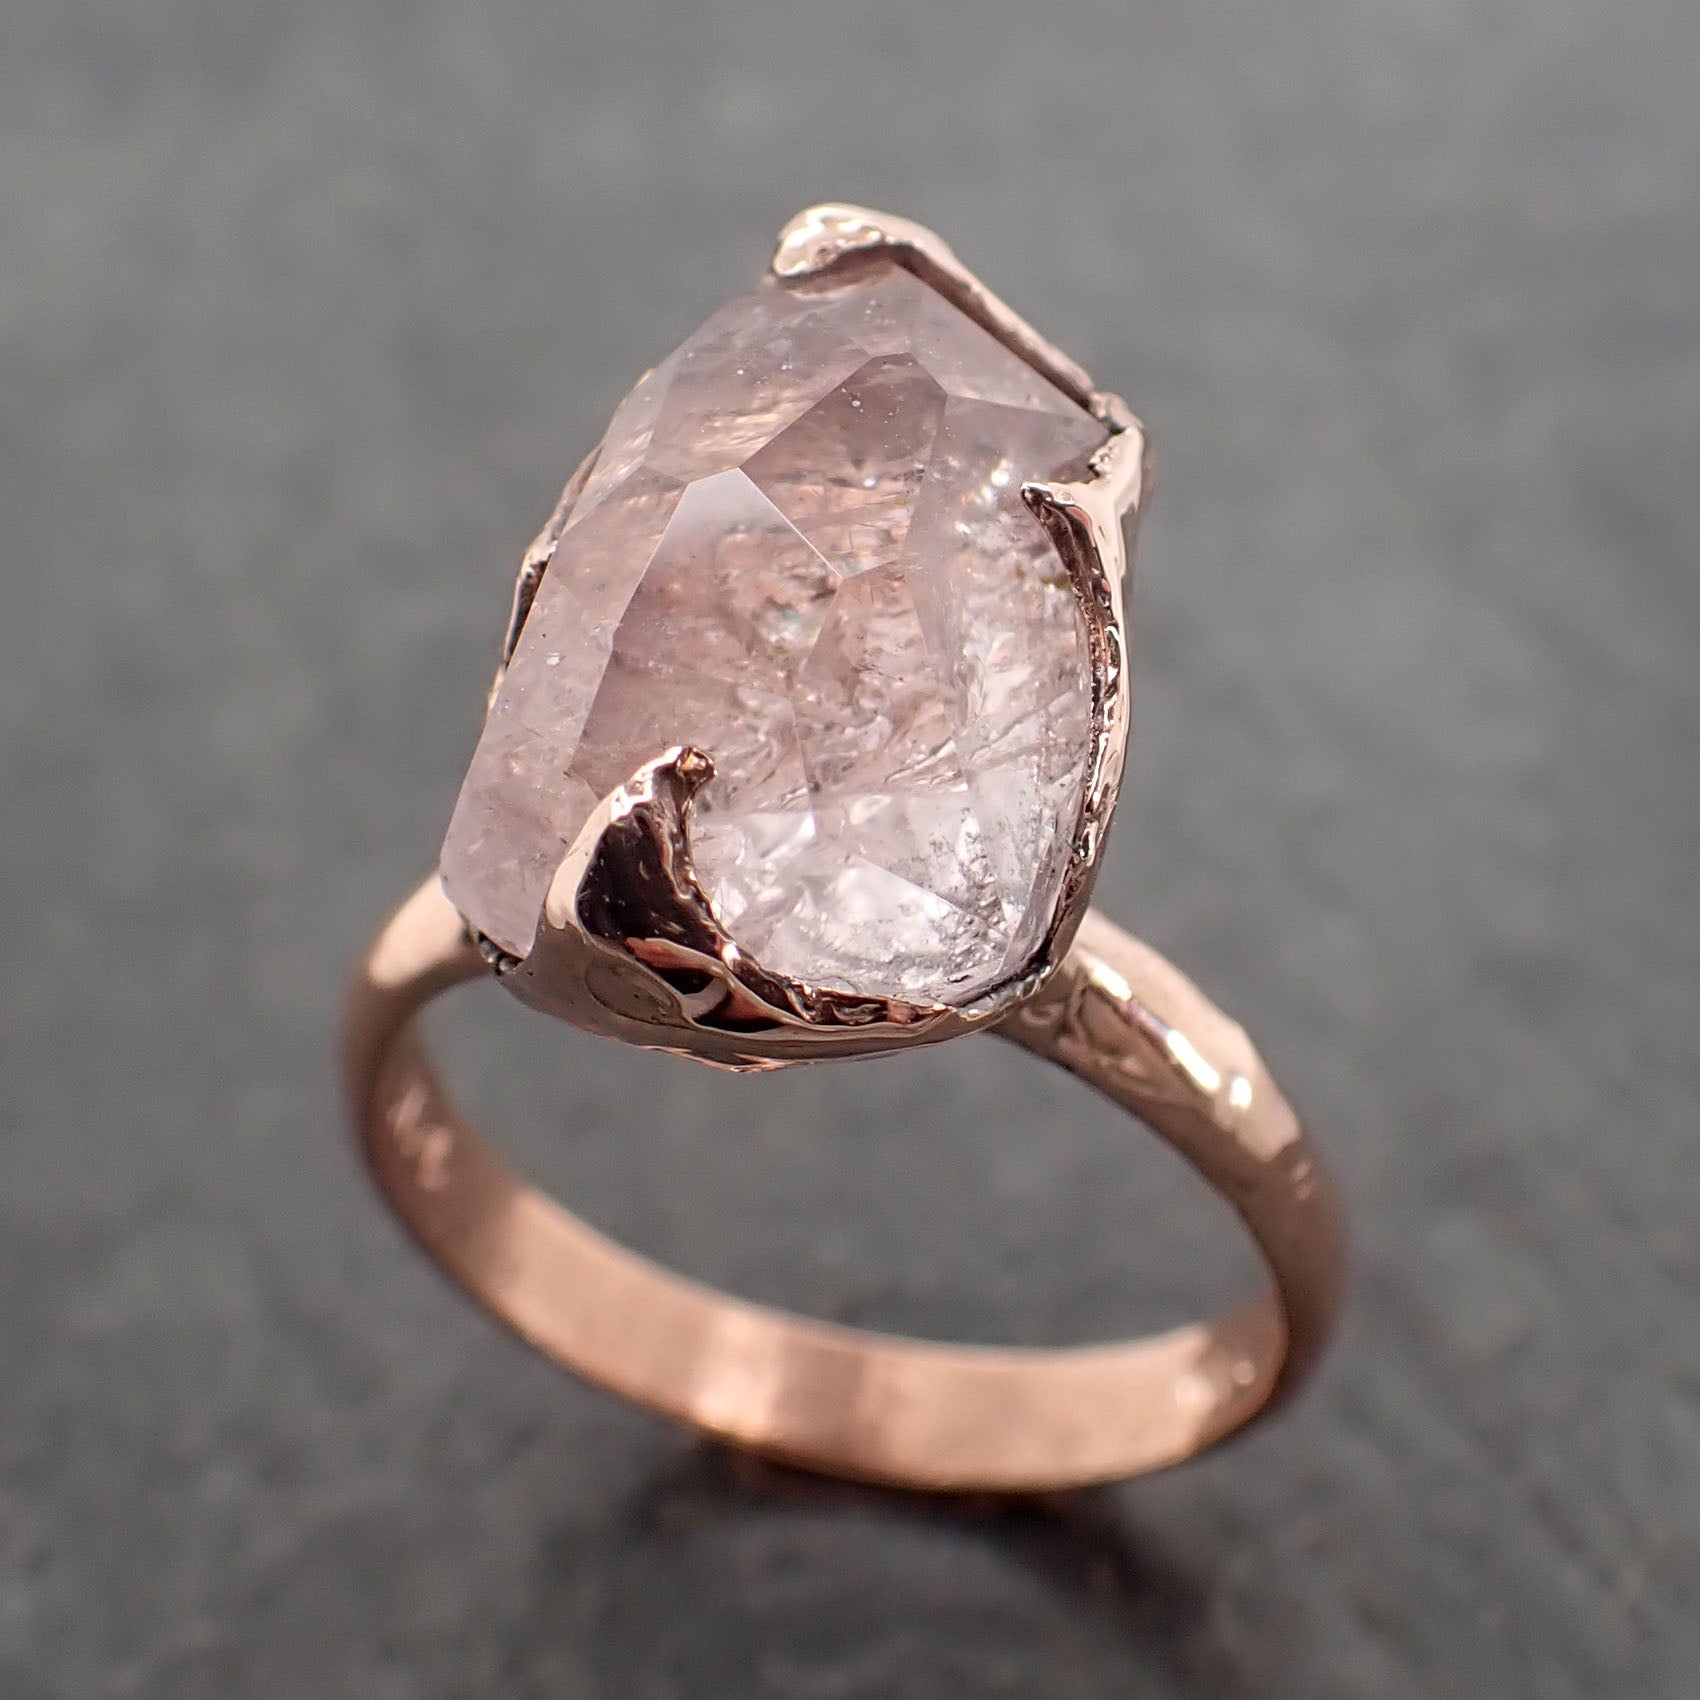 Morganite partially faceted 14k Rose gold solitaire Pink Gemstone Cocktail Ring Statement Ring gemstone Jewelry by Angeline 2392